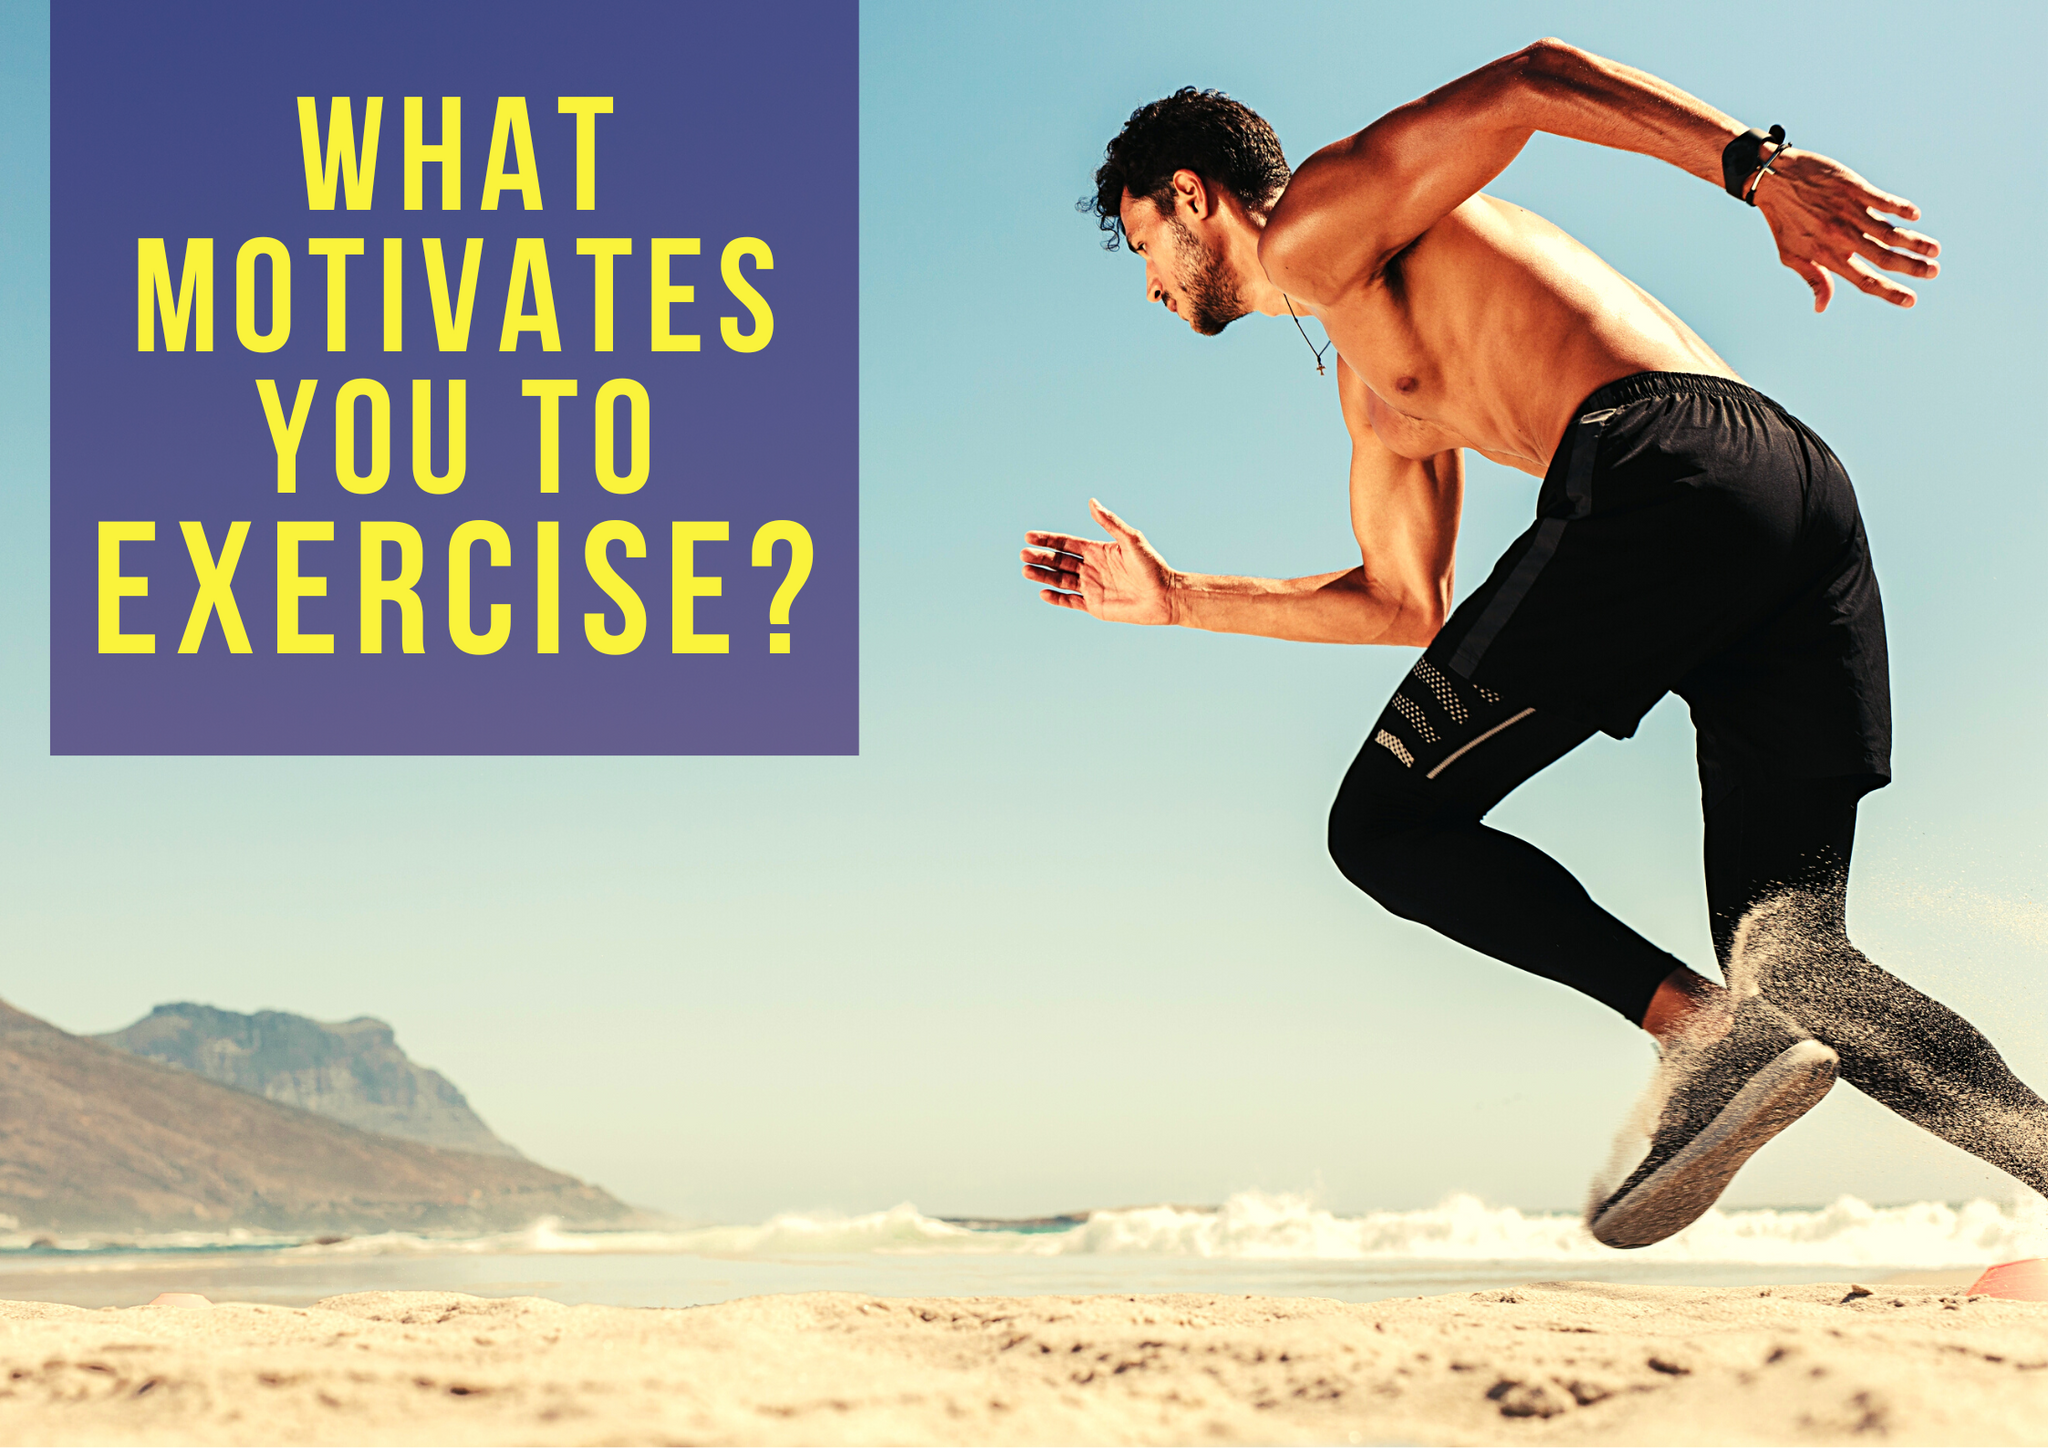 What Motivates YOU to Exercise?